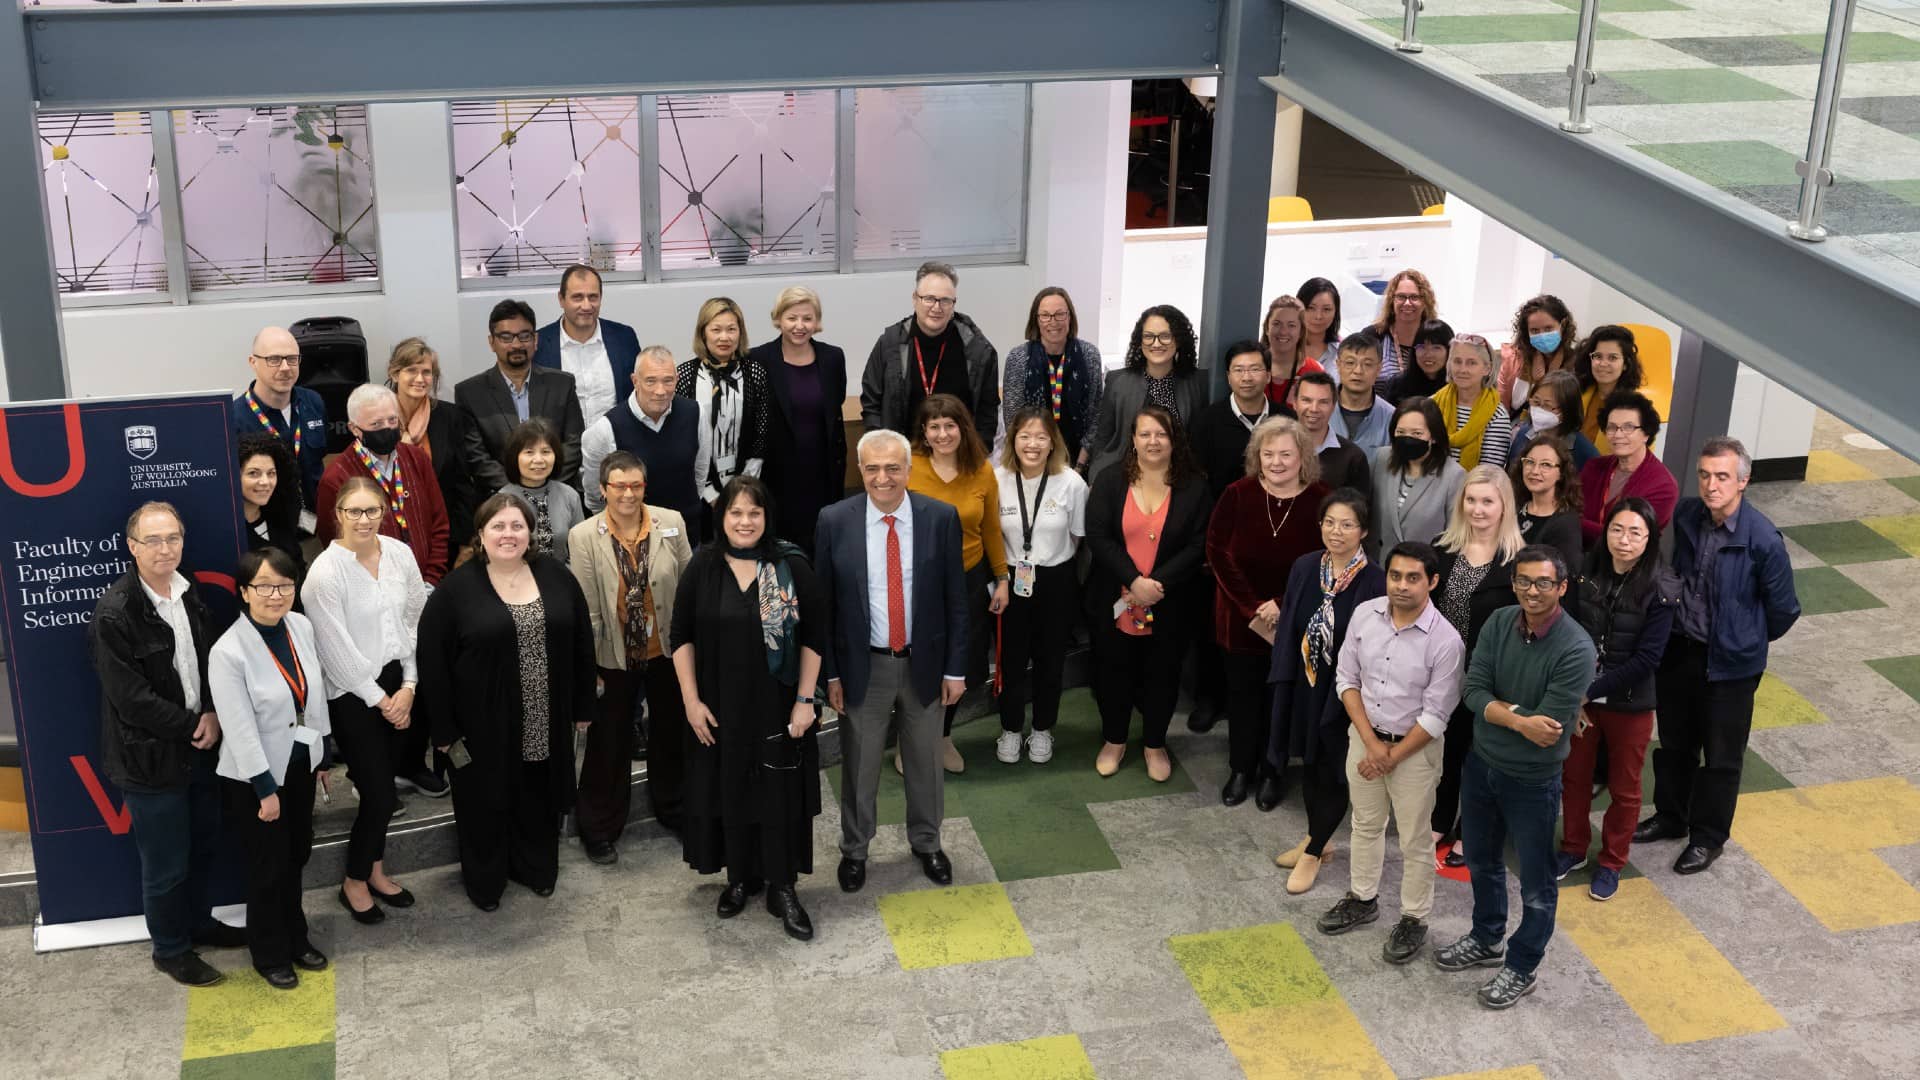 Team members from the Faculty of Engineering and Information Sciences attend the launch of the diversity initiative. They are all smiling. Photo: Mark Newsham